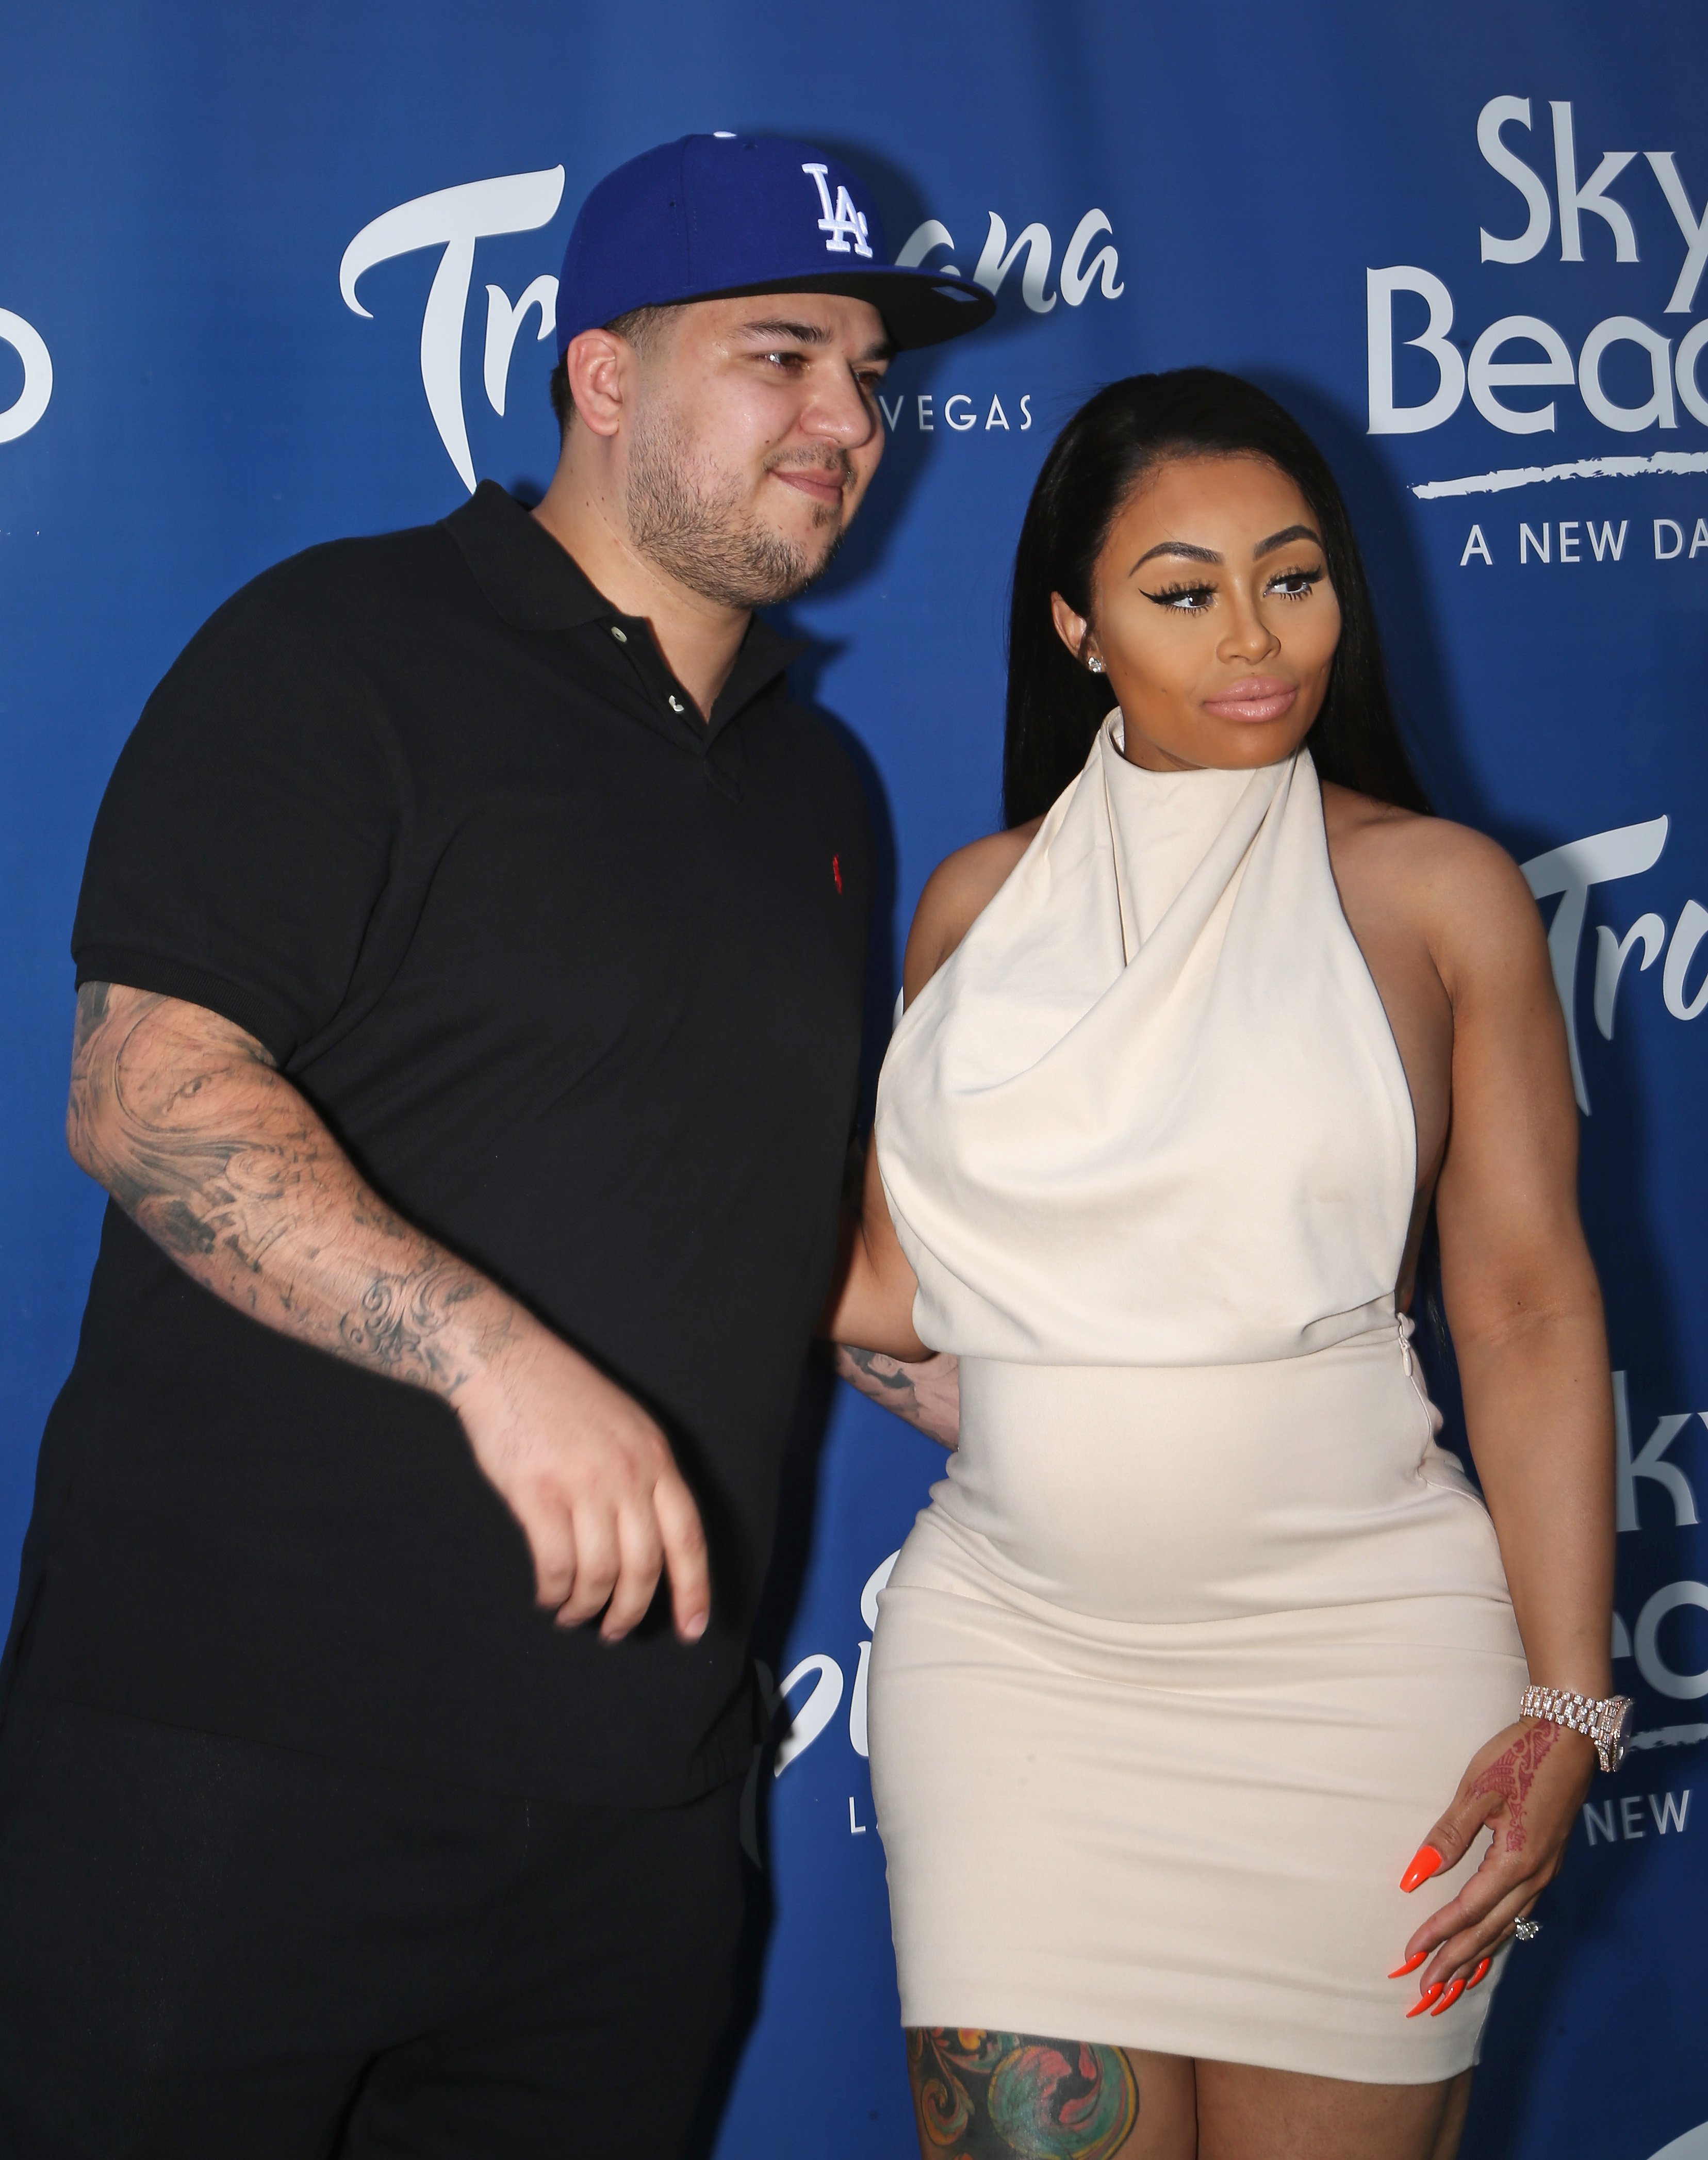 Rob Kardashian and Blac Chyna at the Tropicana Las Vegas in May 2016. | Photo: Getty Images